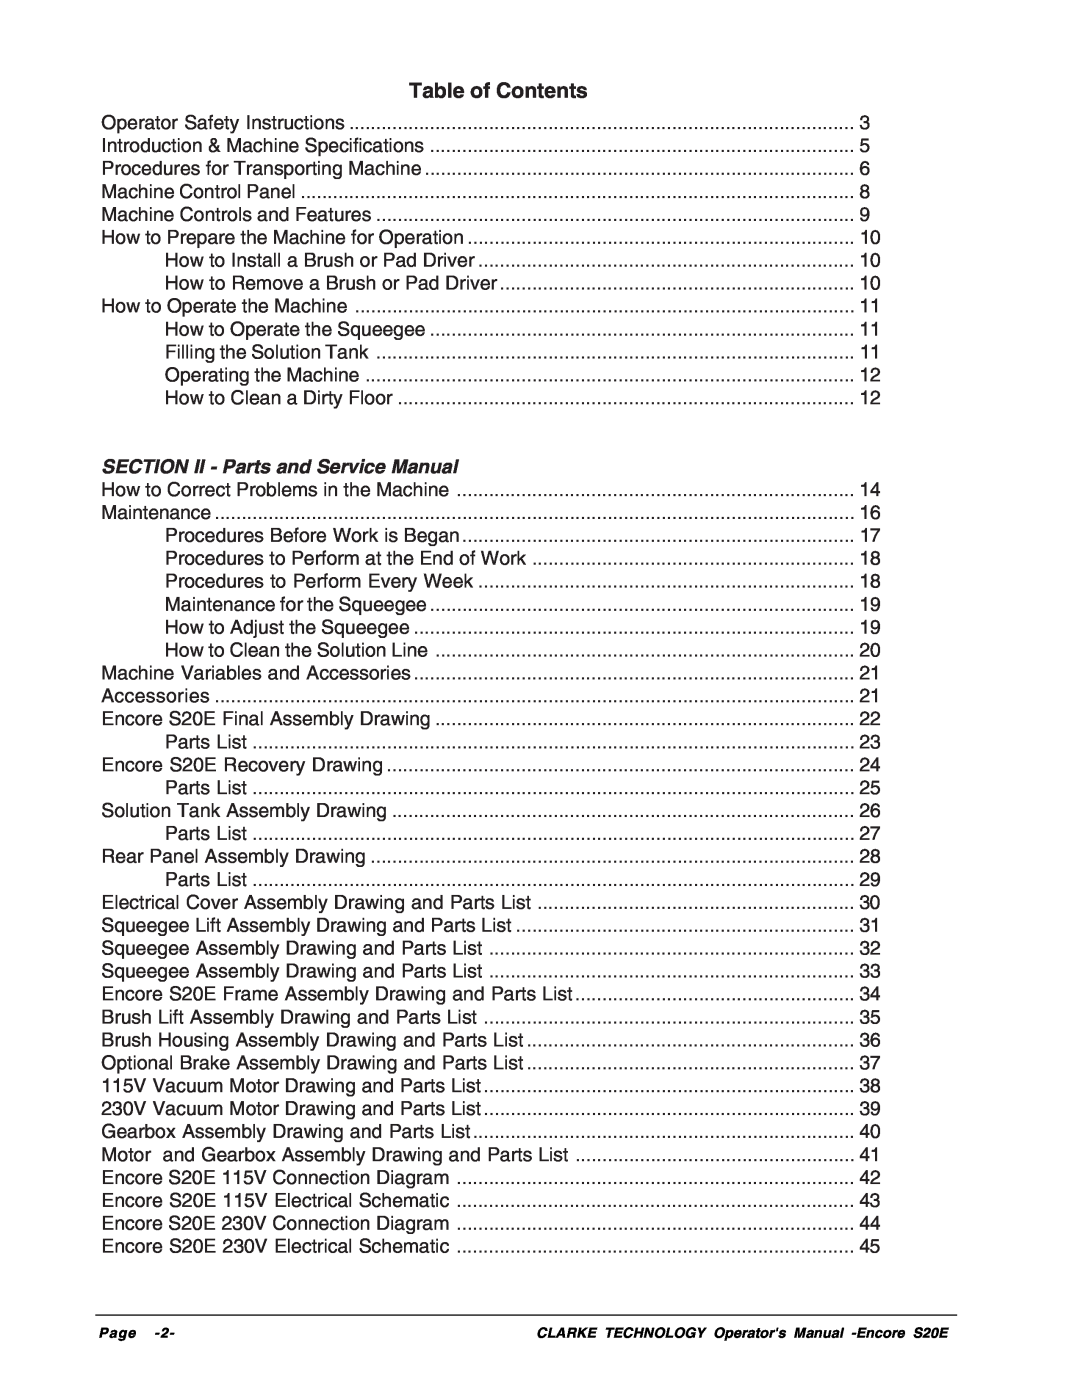 Clarke S20E manual Table of Contents, SECTION II - Parts and Service Manual 